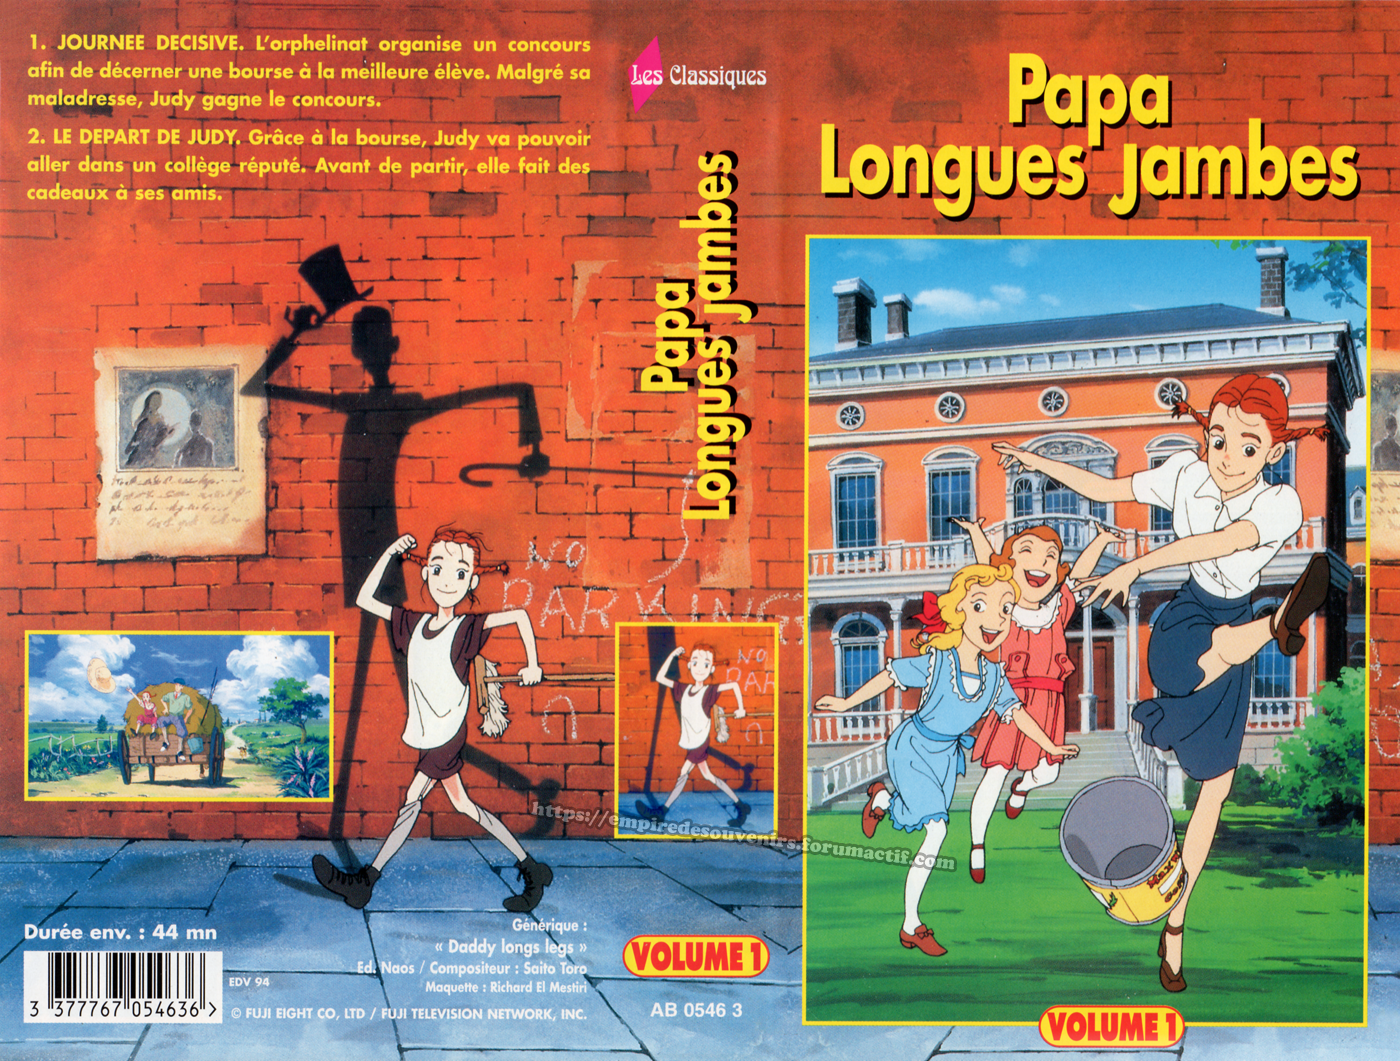 [VHS] Papa longues jambes Dt3k